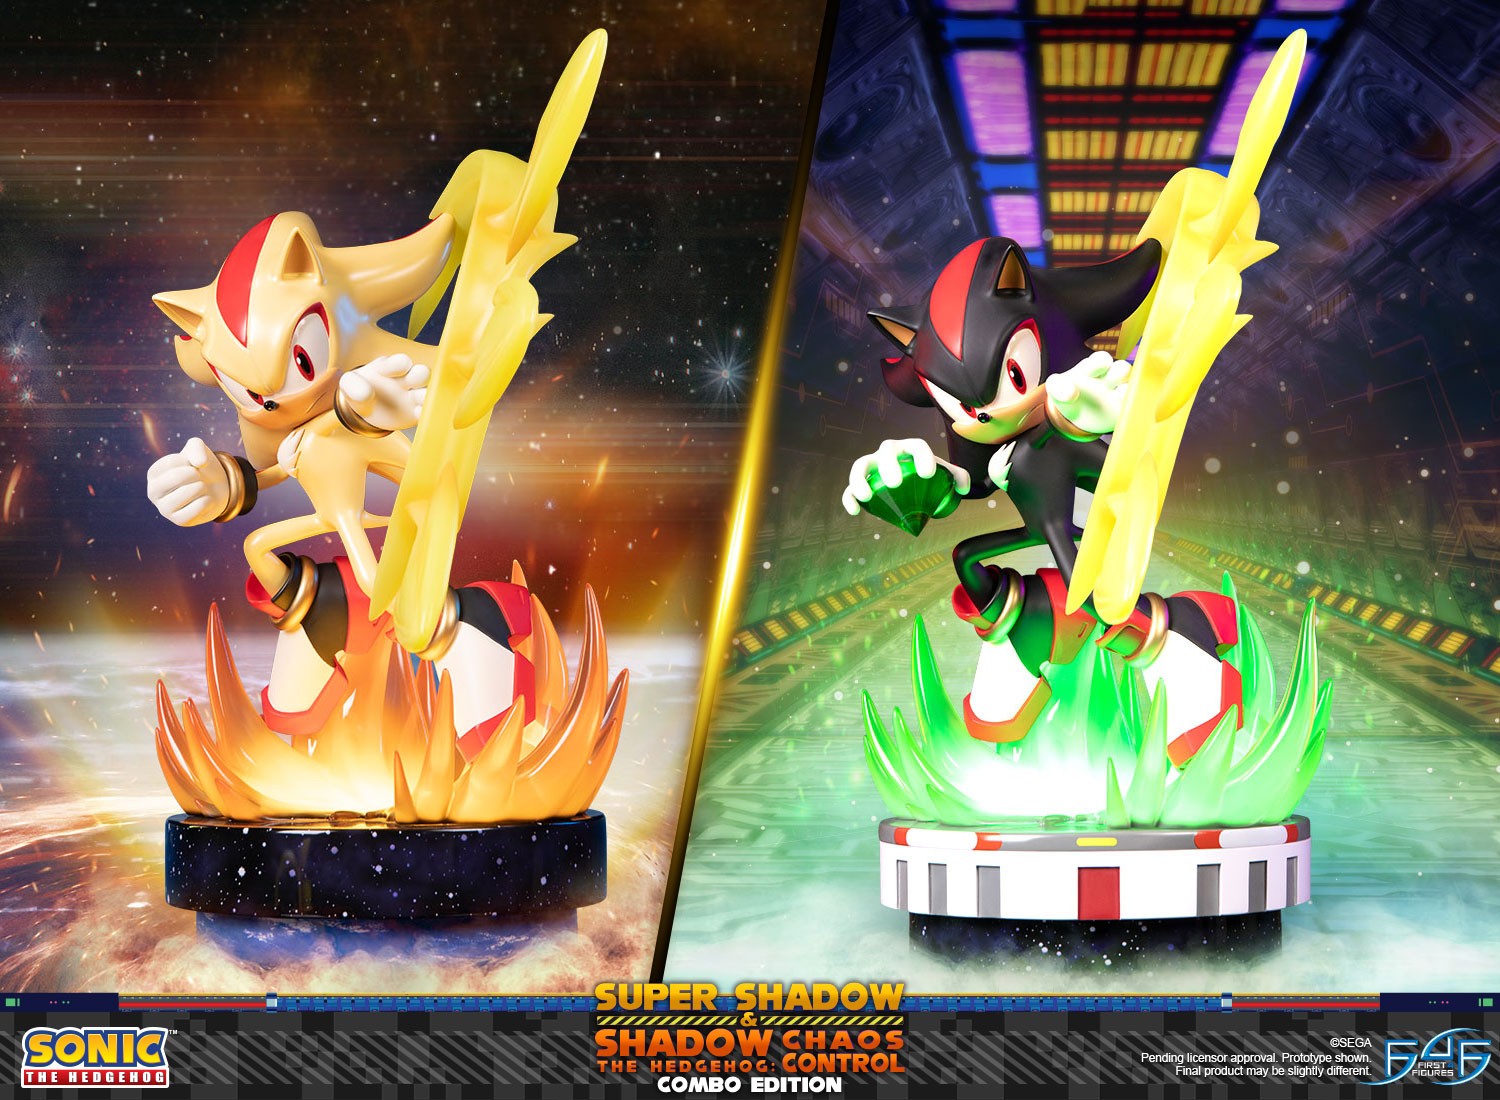 Sonic the Hedgehog™ – Super Shadow and Shadow the Hedgehog: Chaos Control (Combo Edition) 